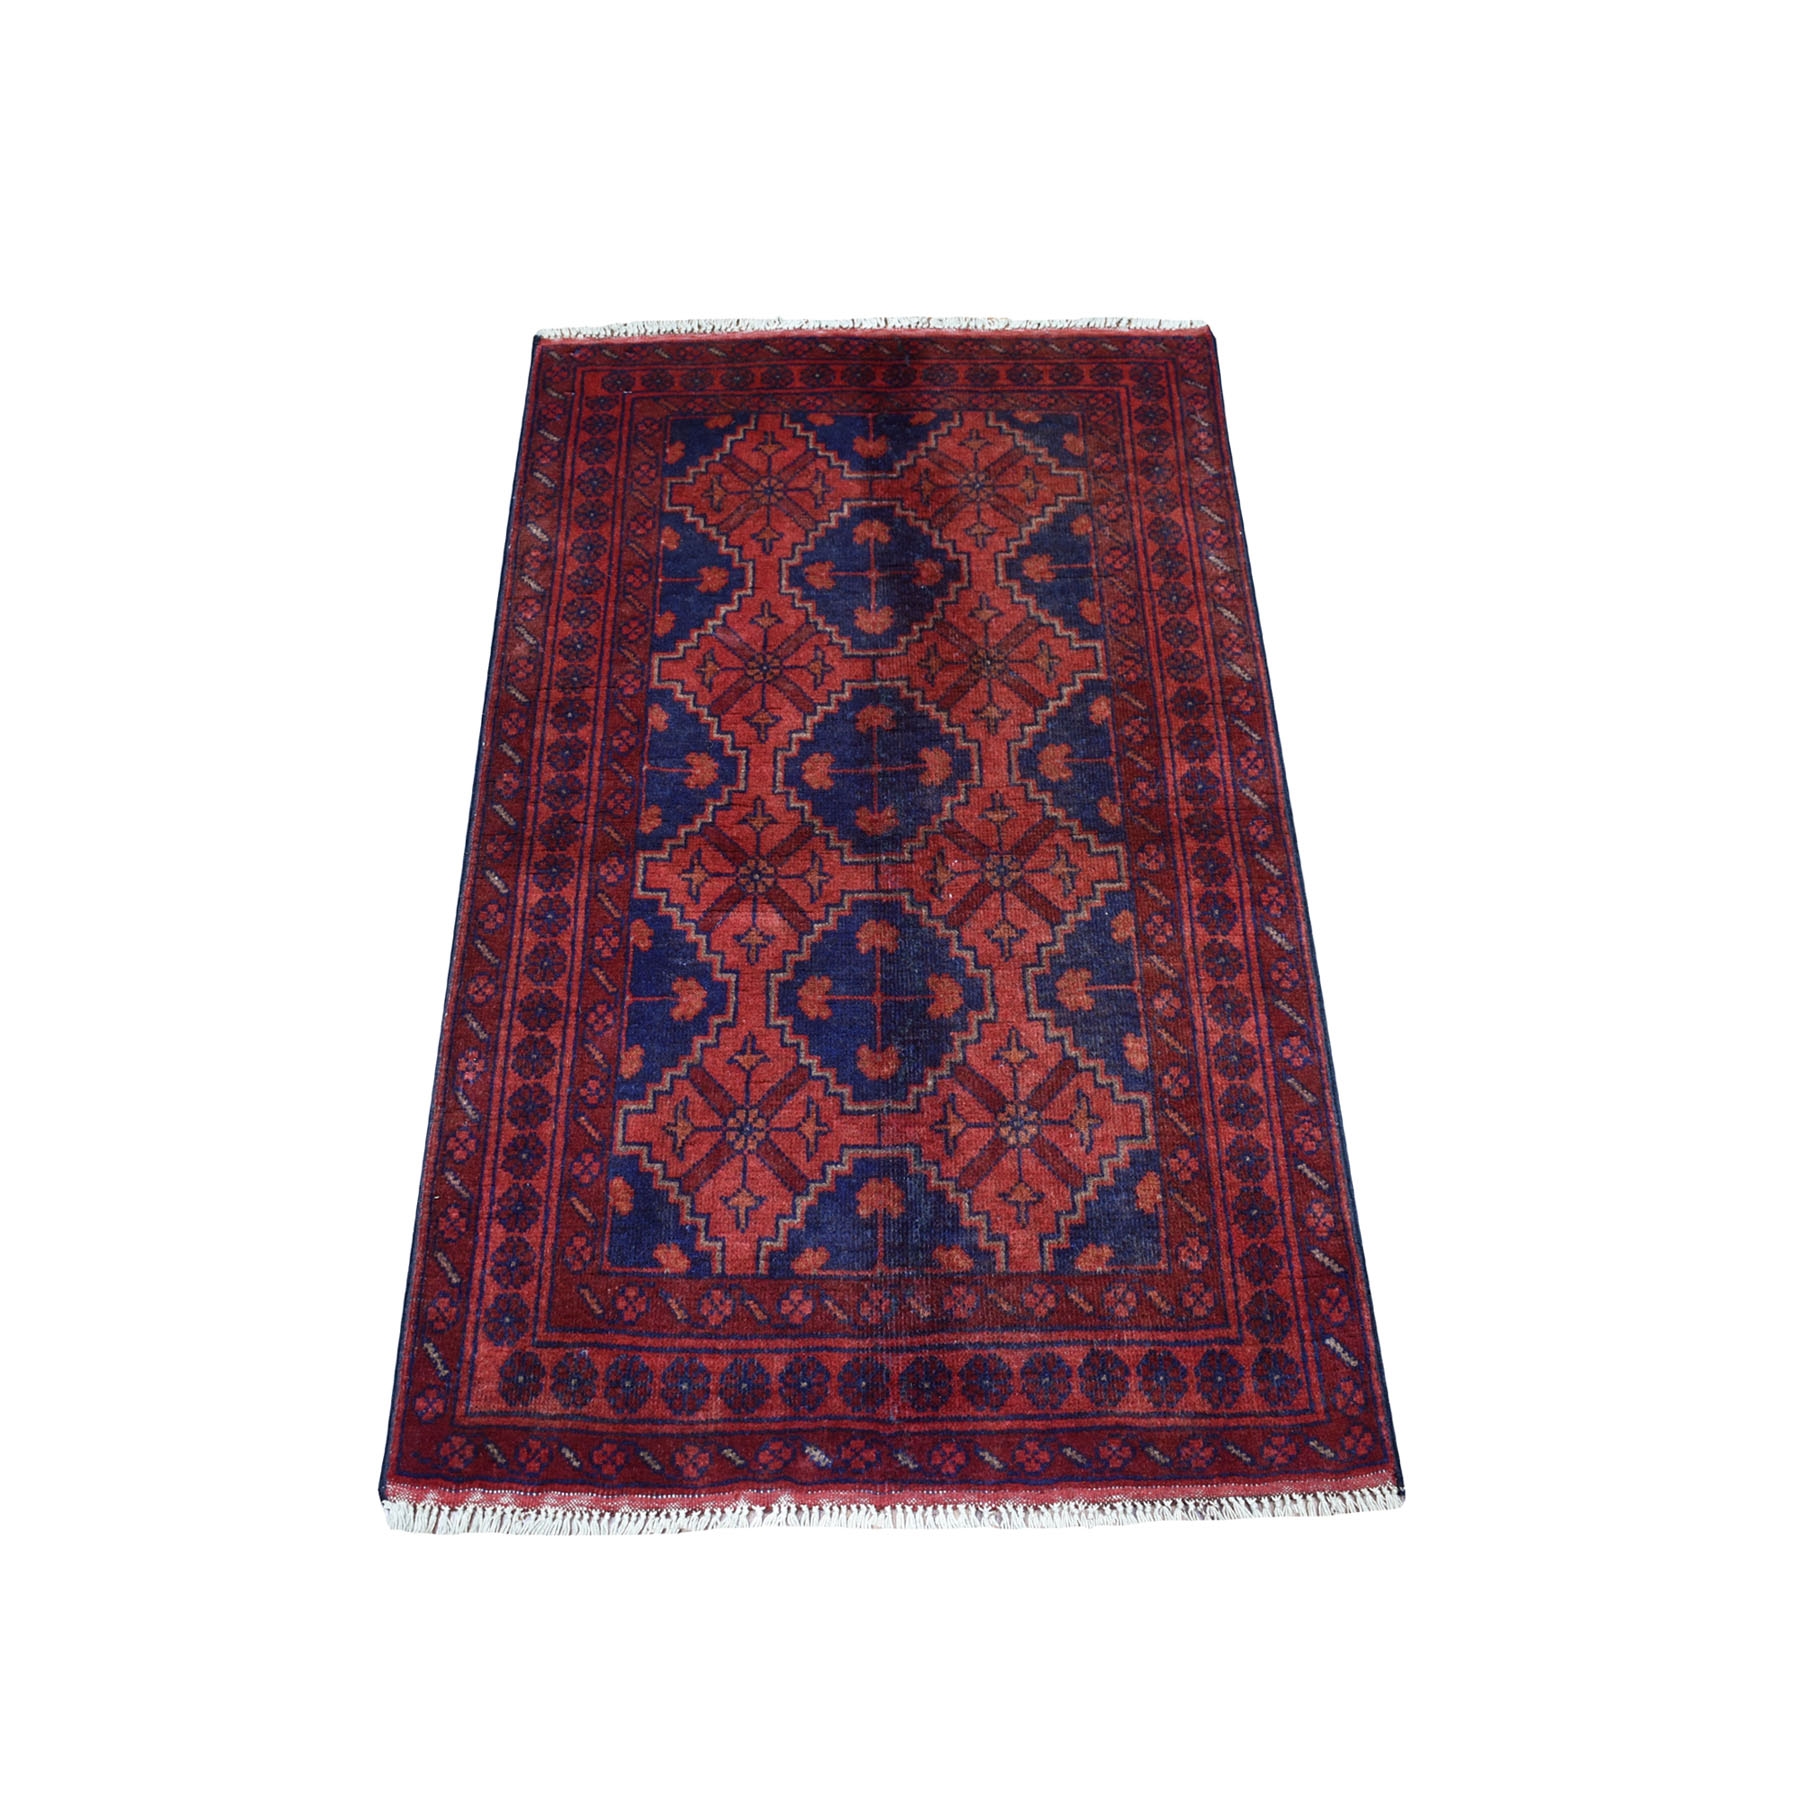 2'5"X4'1" Deep And Saturated Red Geometric Afghan Andkhoy Pure Wool Hand Knotted Oriental Rug moaec7a7